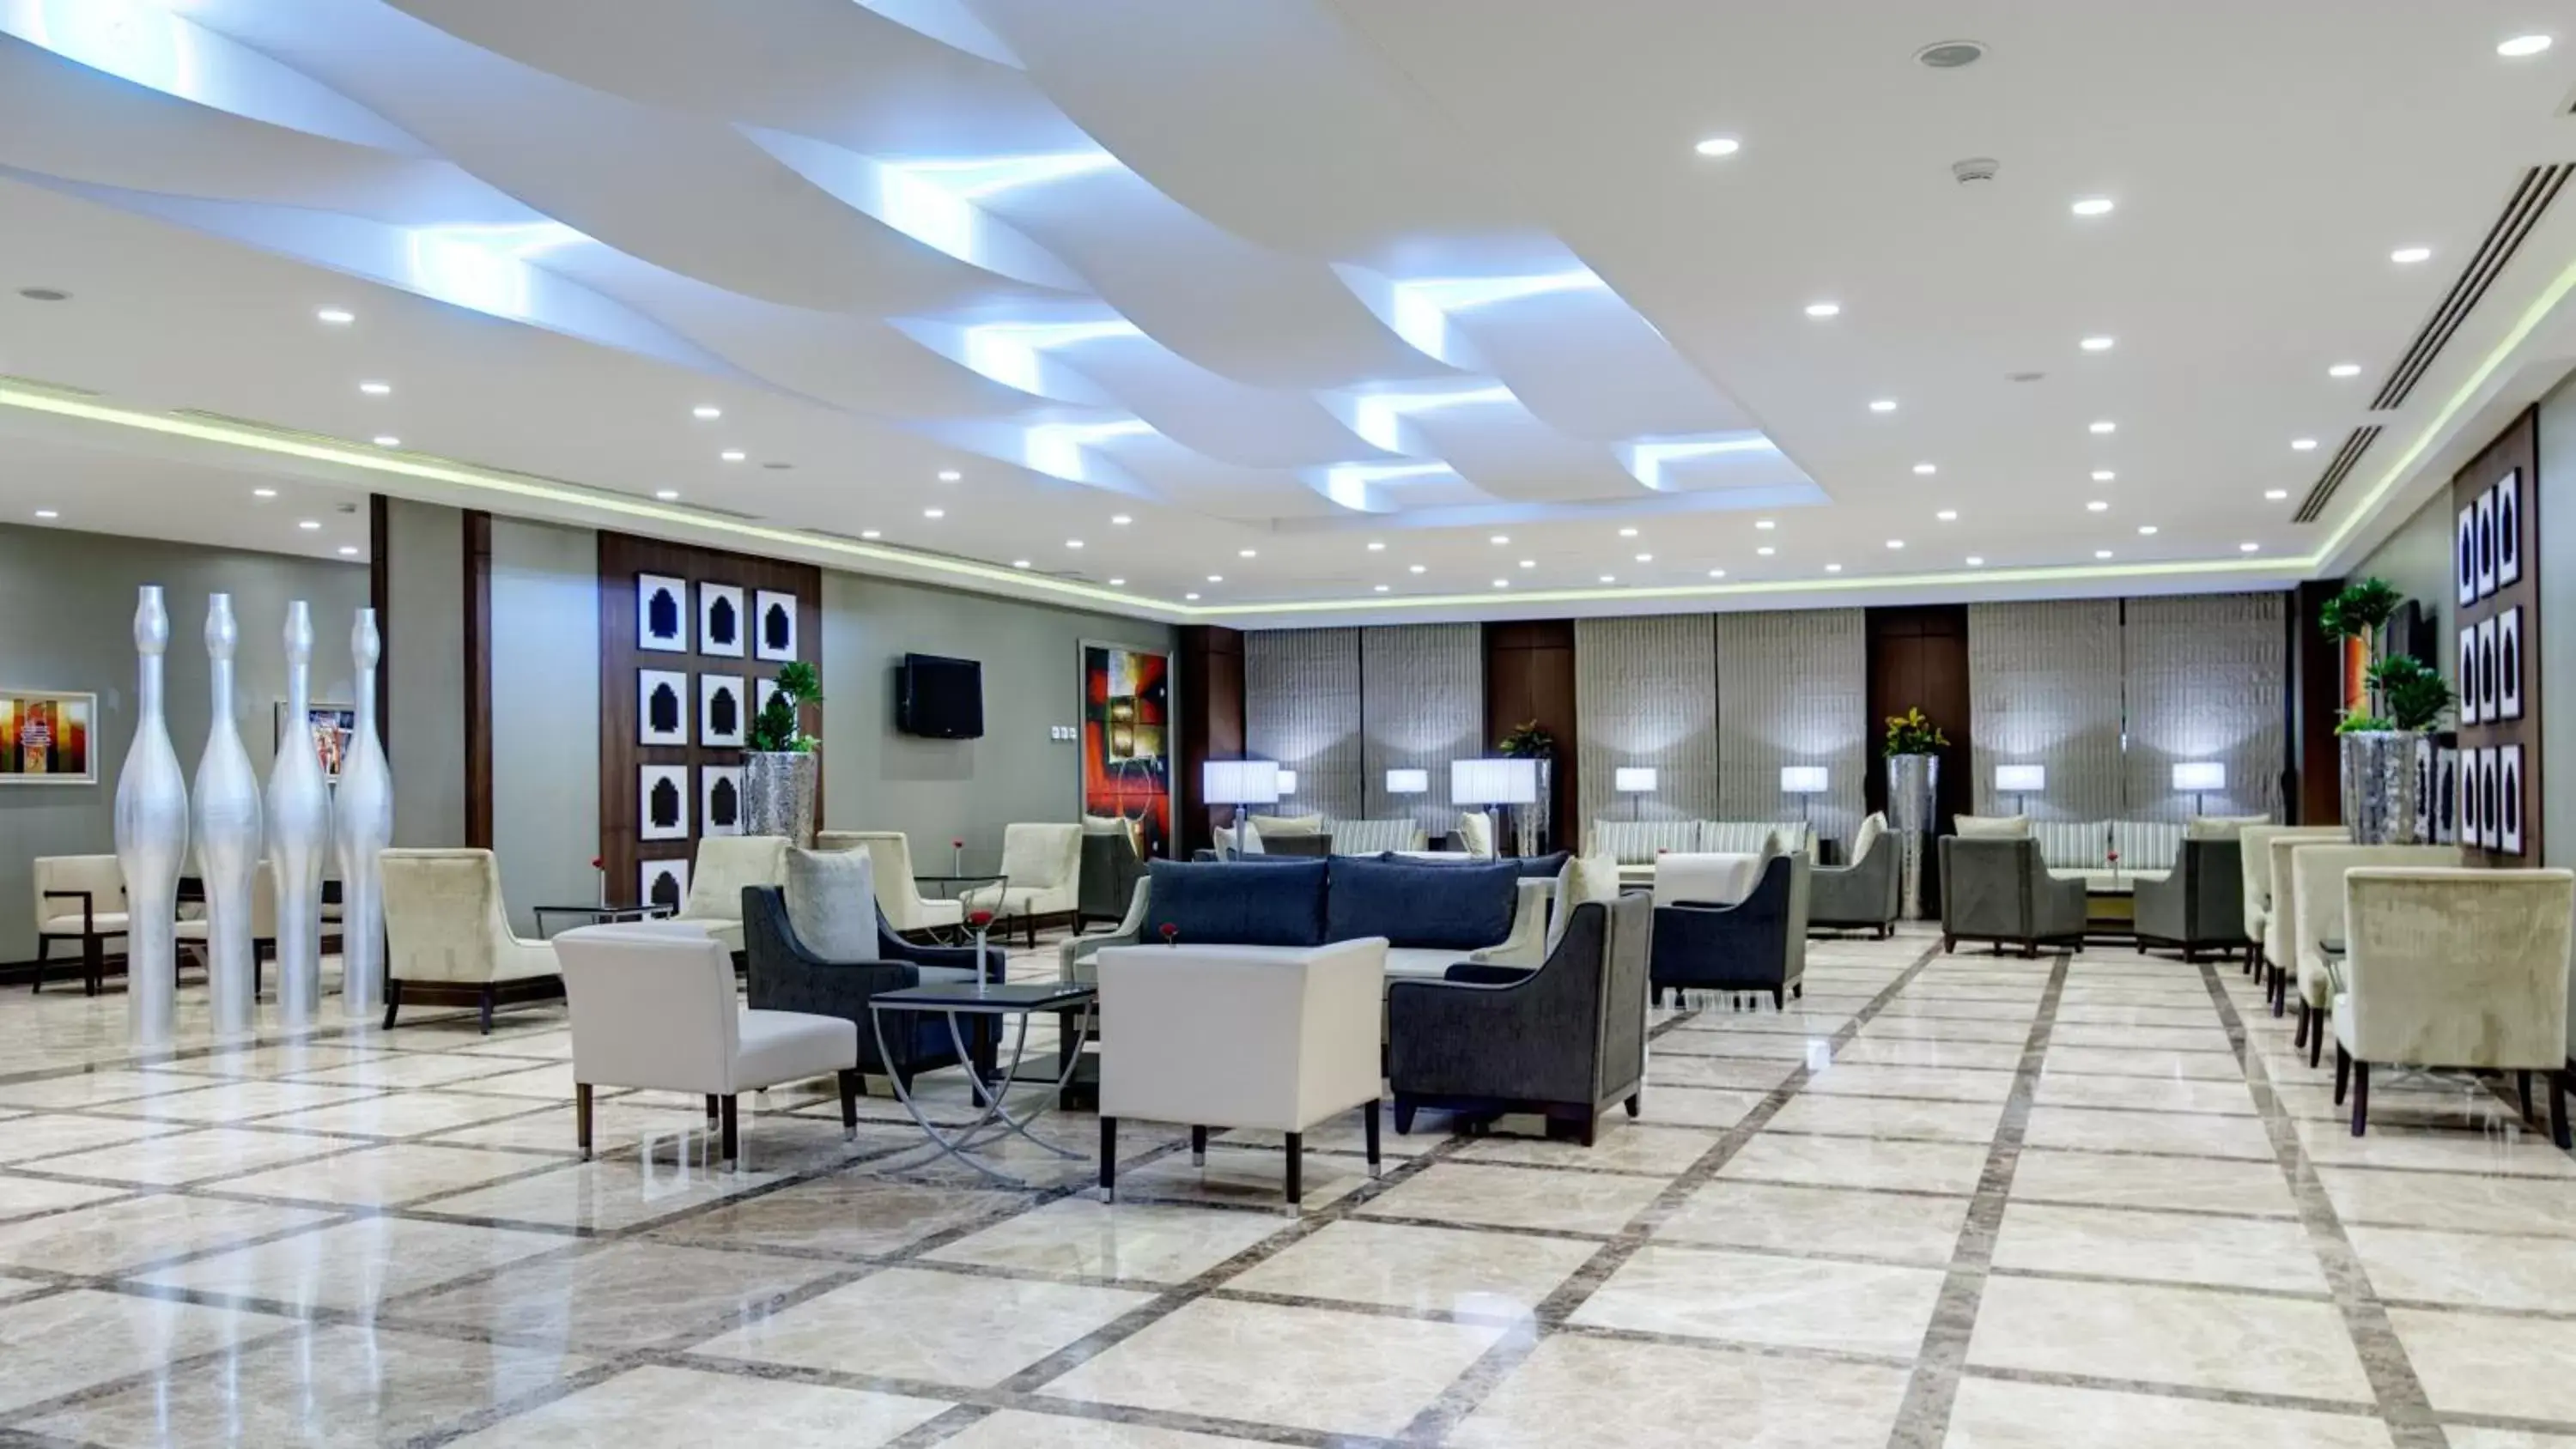 Property building in Crowne Plaza Madinah, an IHG Hotel